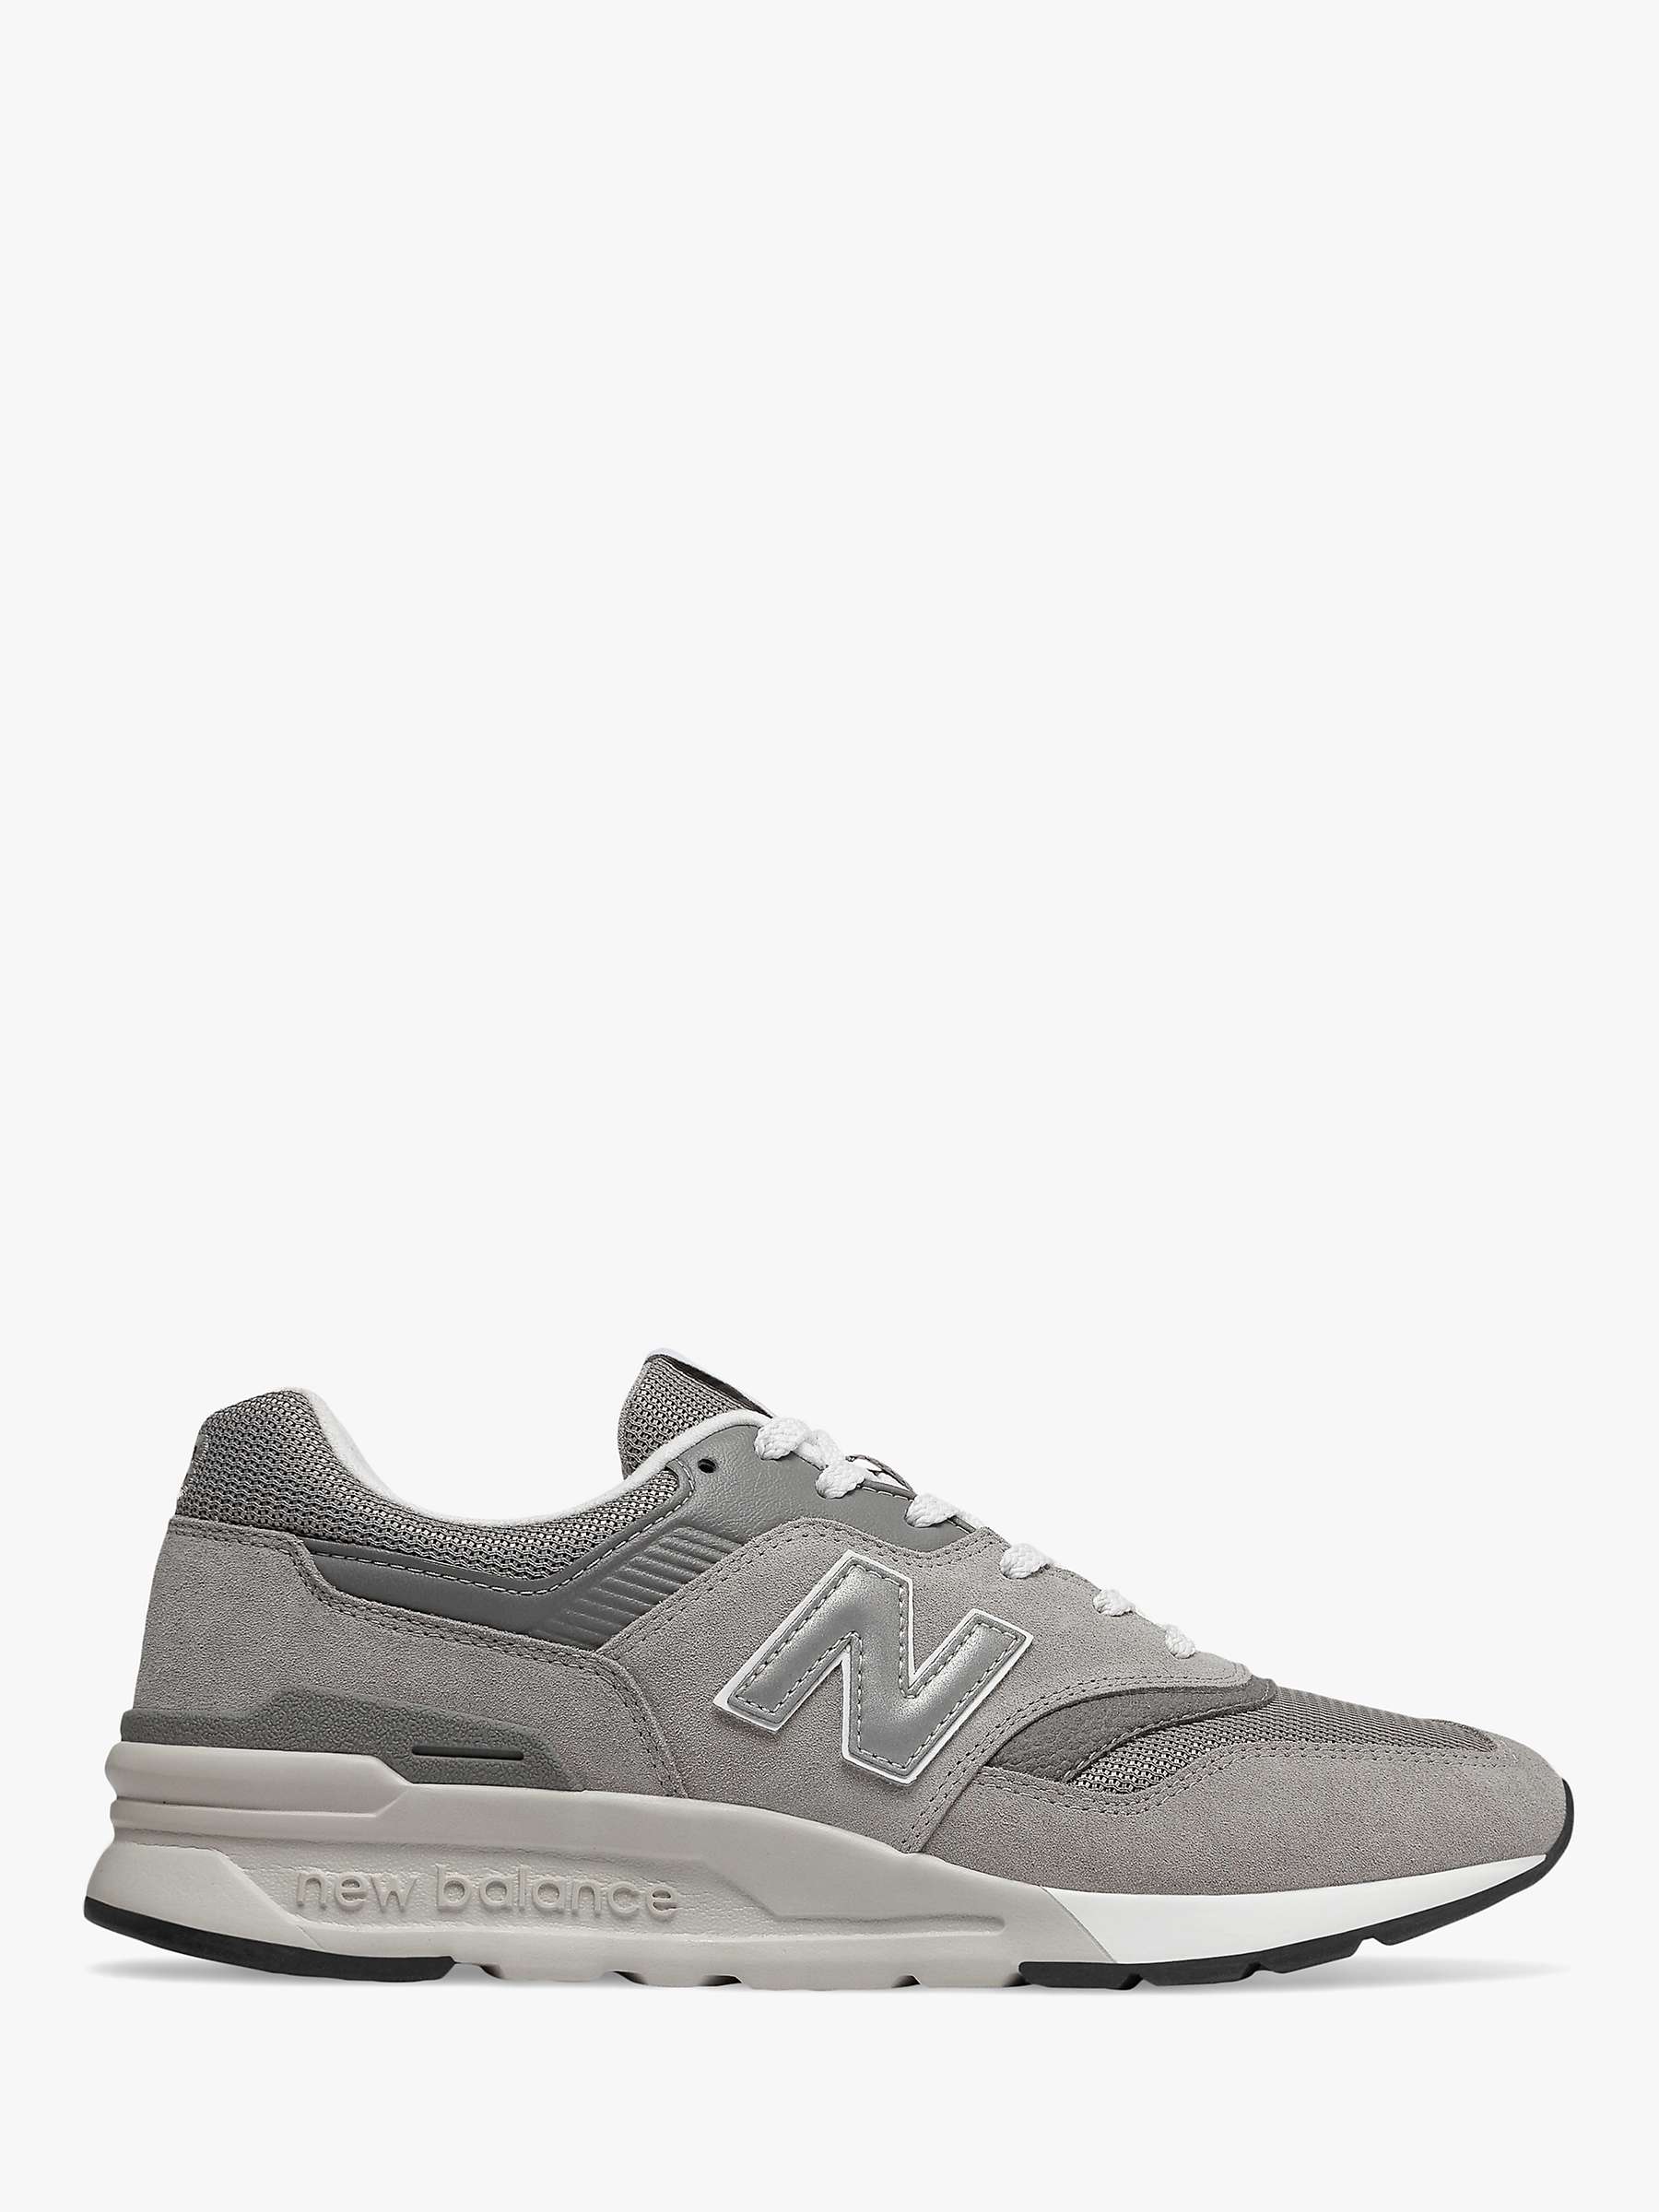 Buy New Balance 997H Men's Suede Trainers Online at johnlewis.com